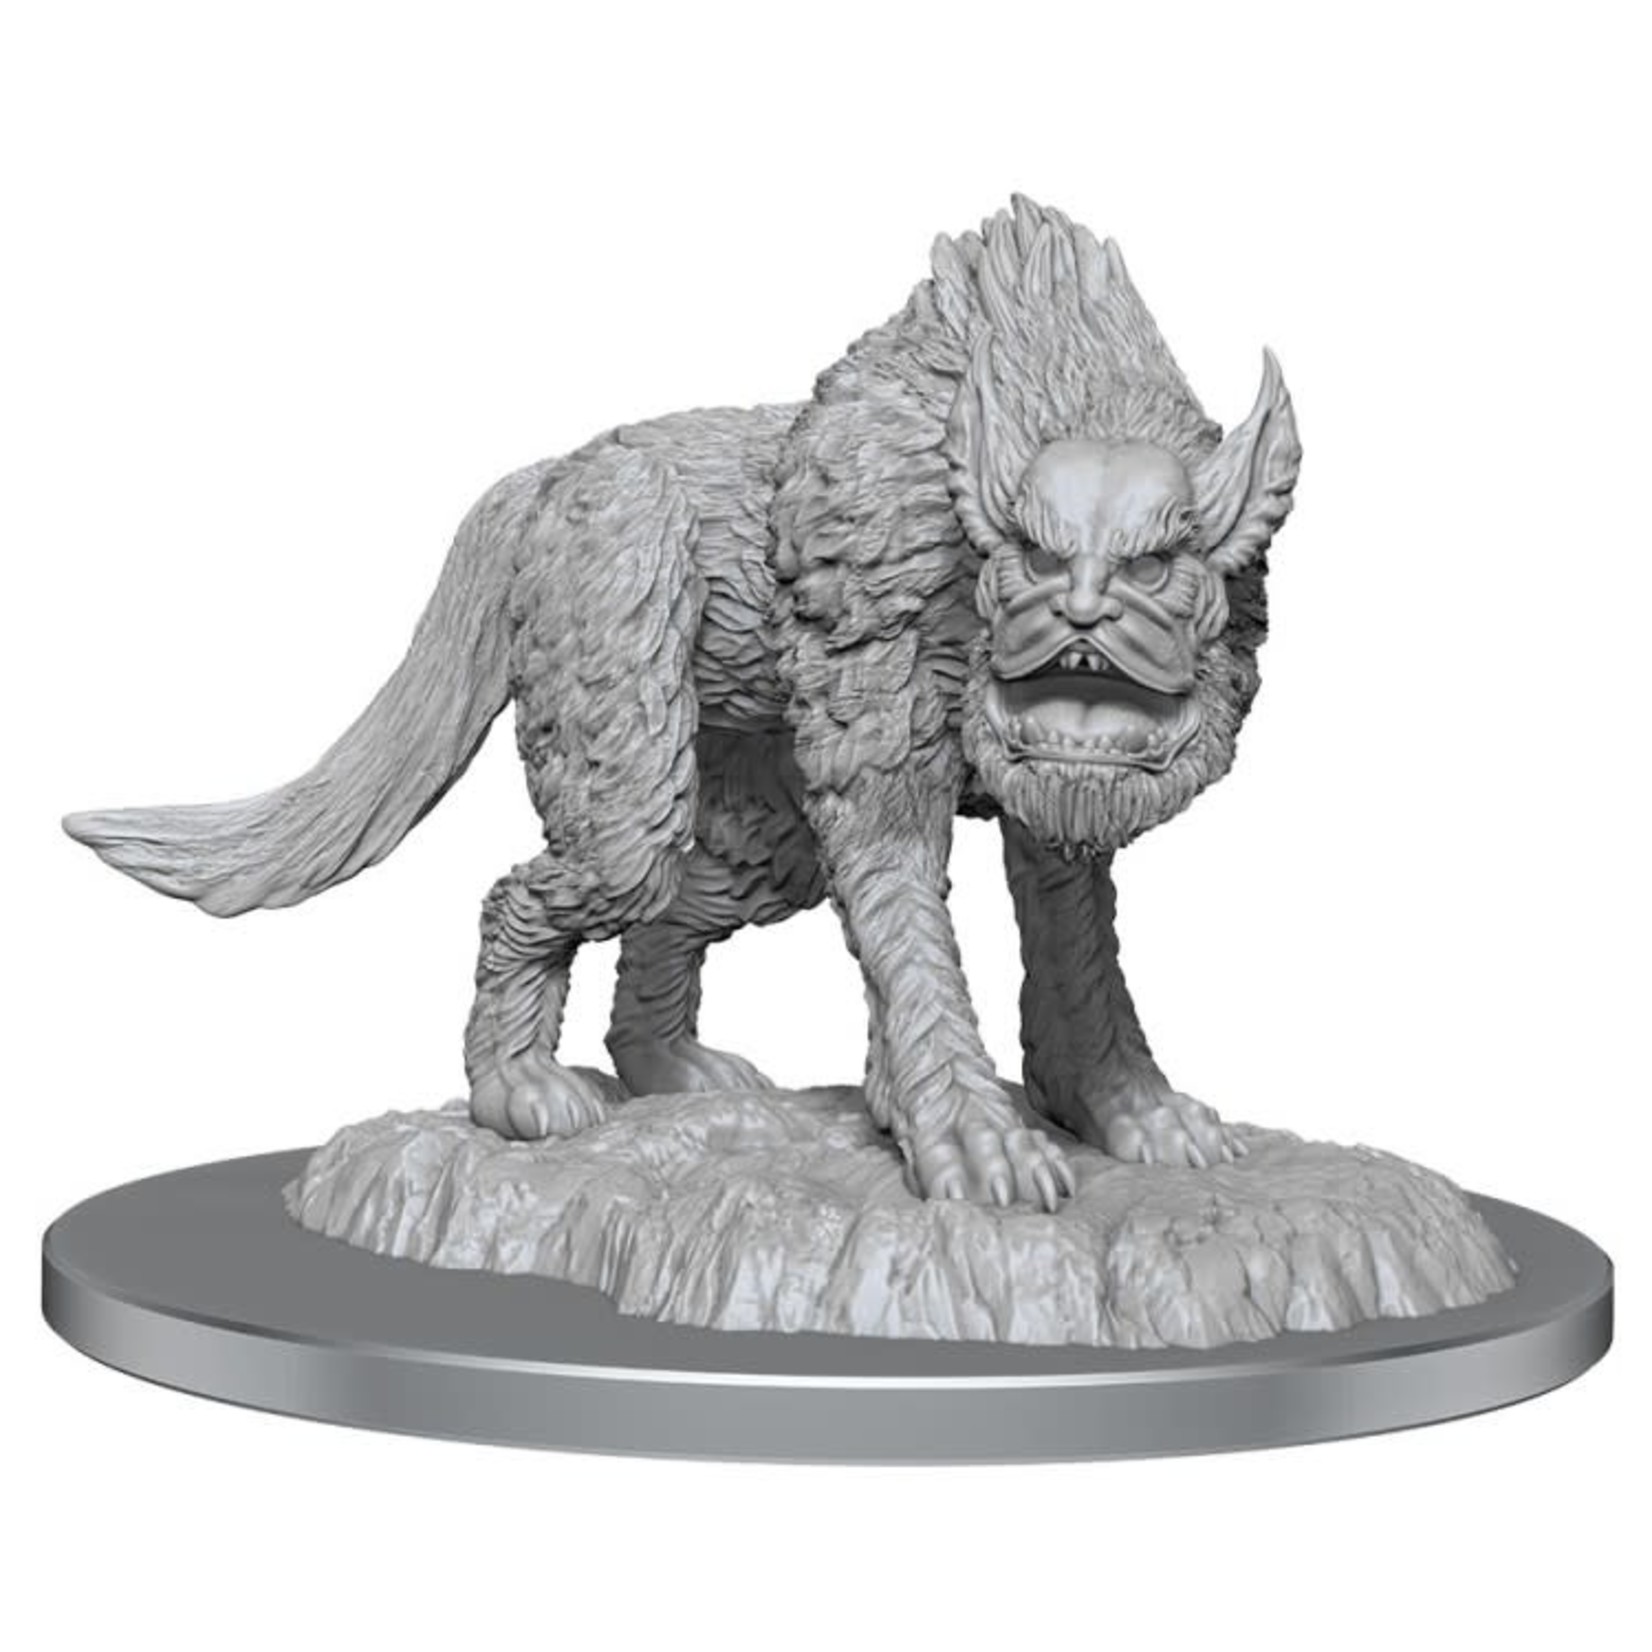 WizKids Dungeons and Dragons Nolzur's Marvelous Minis Yeth Hound